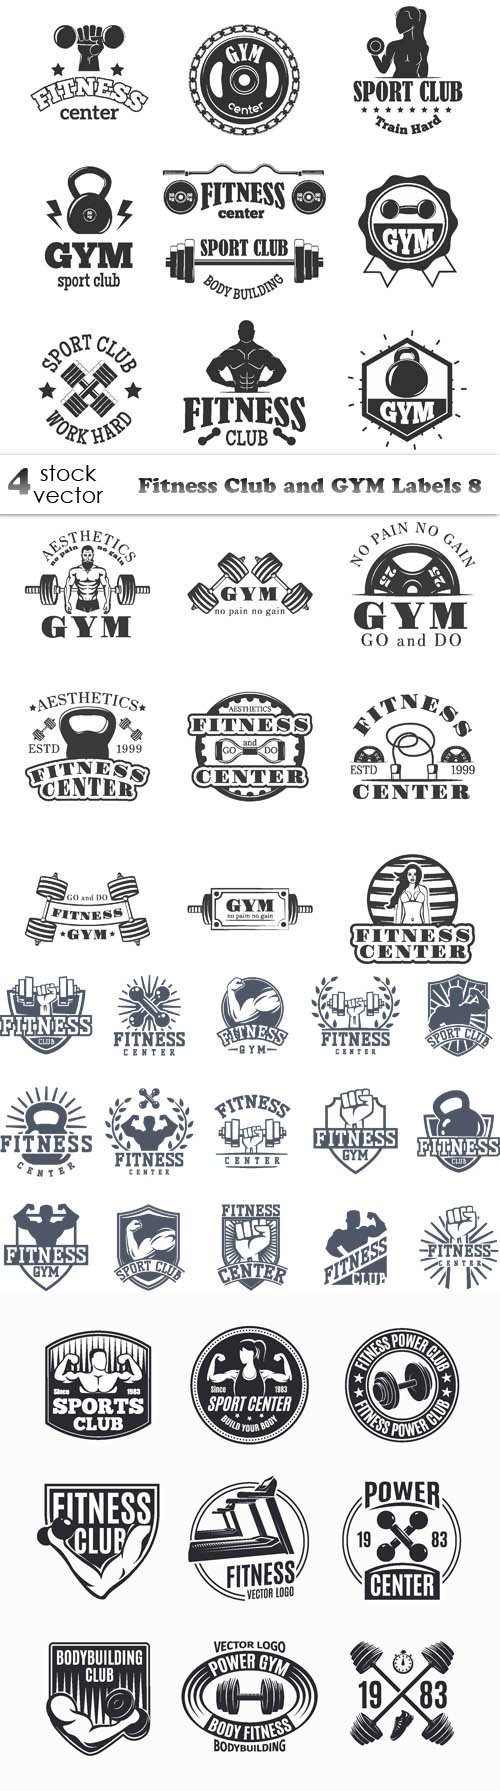 Vectors - Fitness Club and GYM Labels 8